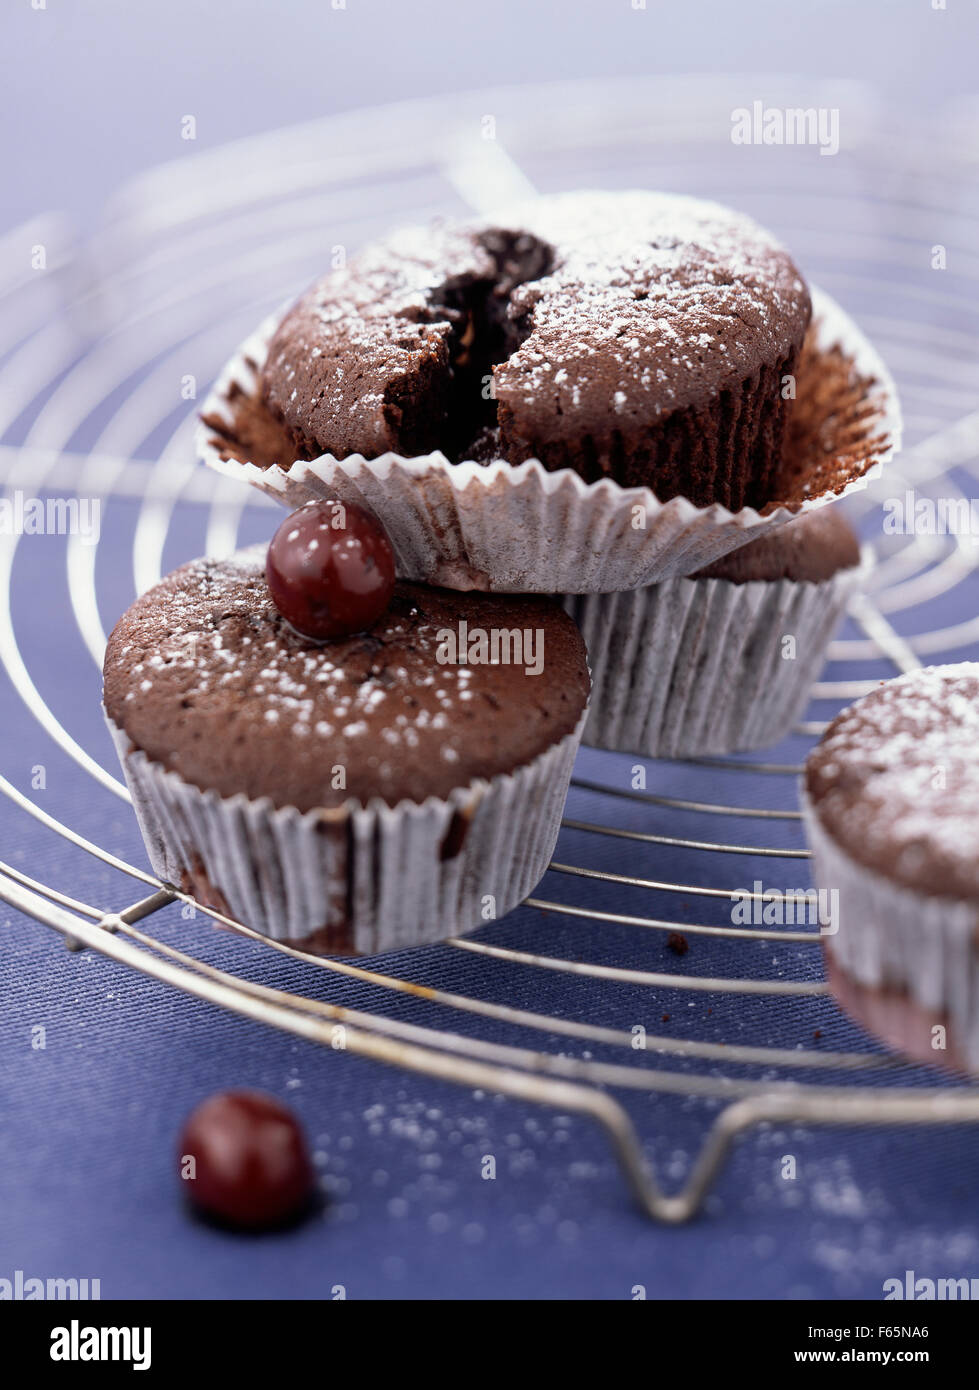 Chocolate and cherries in eau-de-vie cup cakes Stock Photo